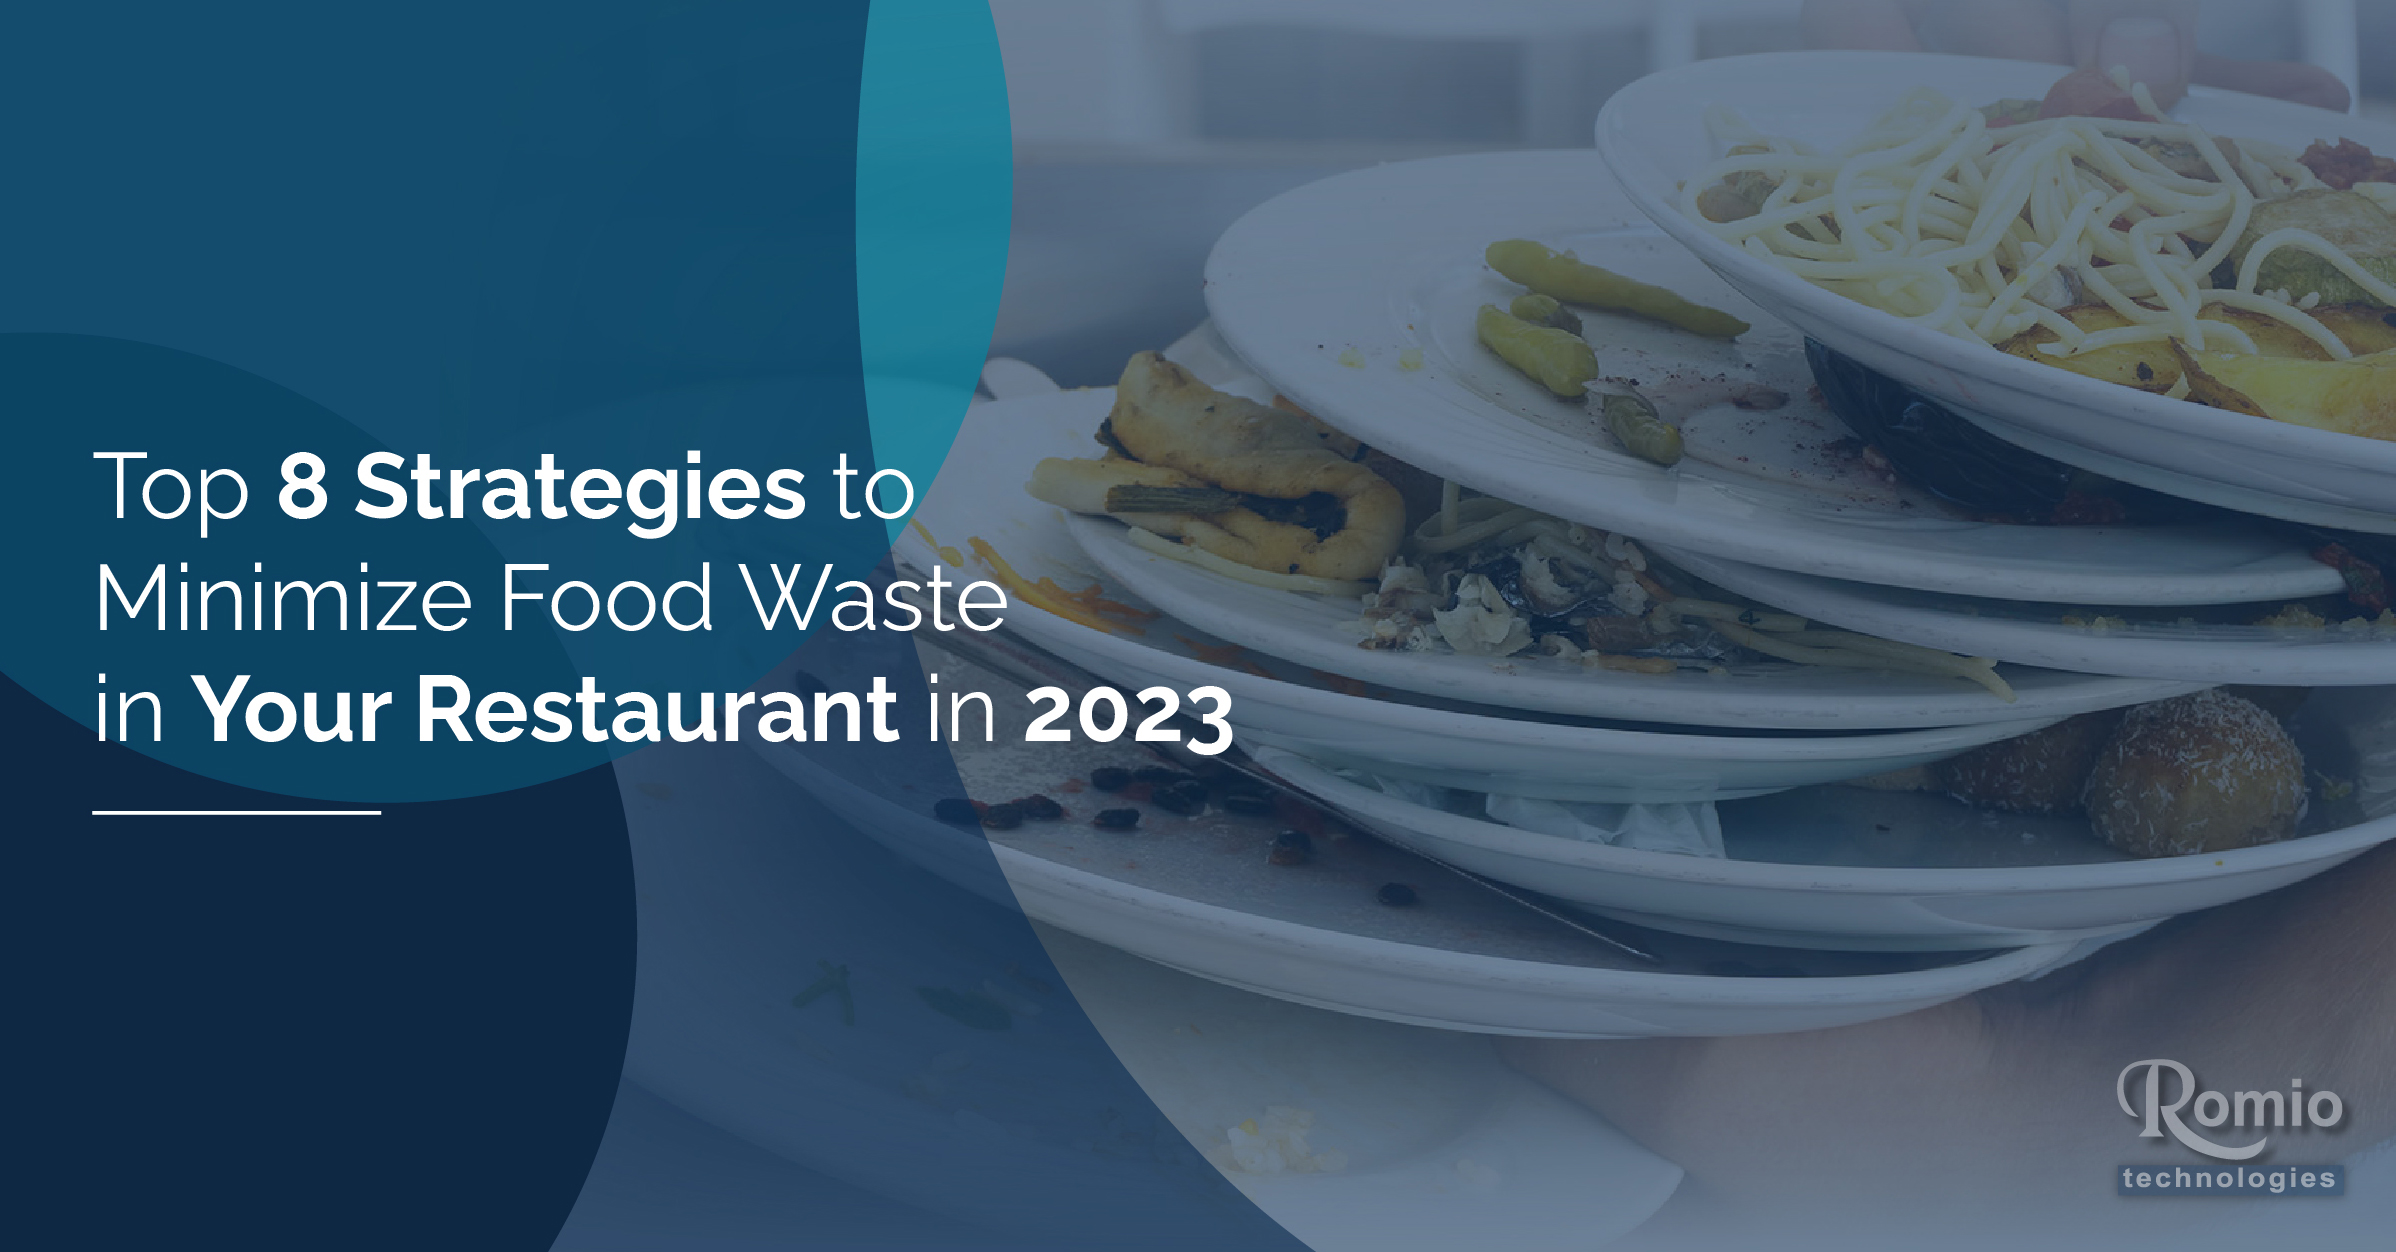 Top 8 Strategies to Minimize Food Waste in Your Restaurant in 2023